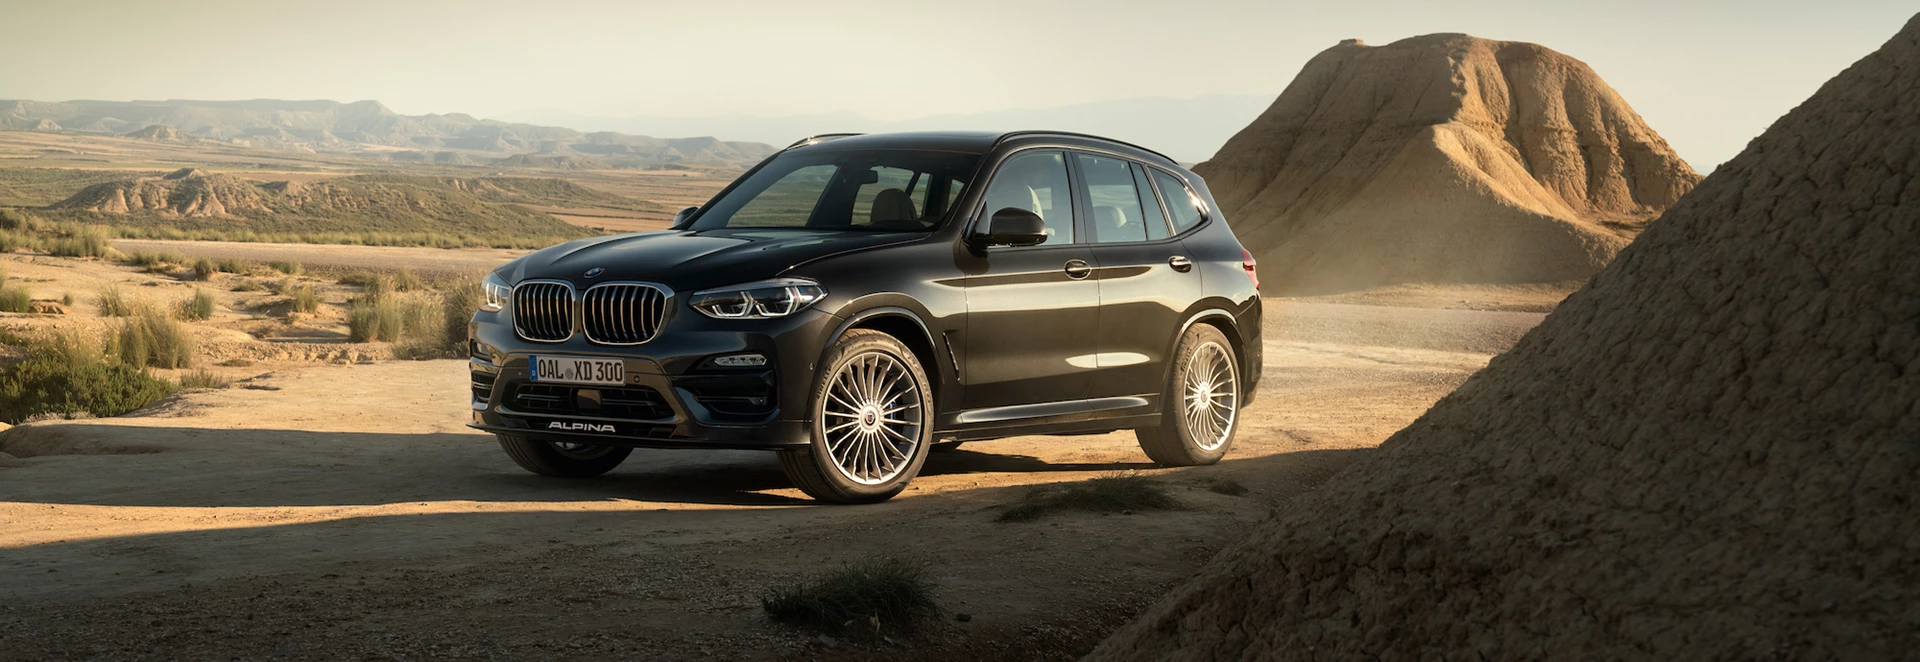 Alpina to start deliveries of XD3 in April 2019